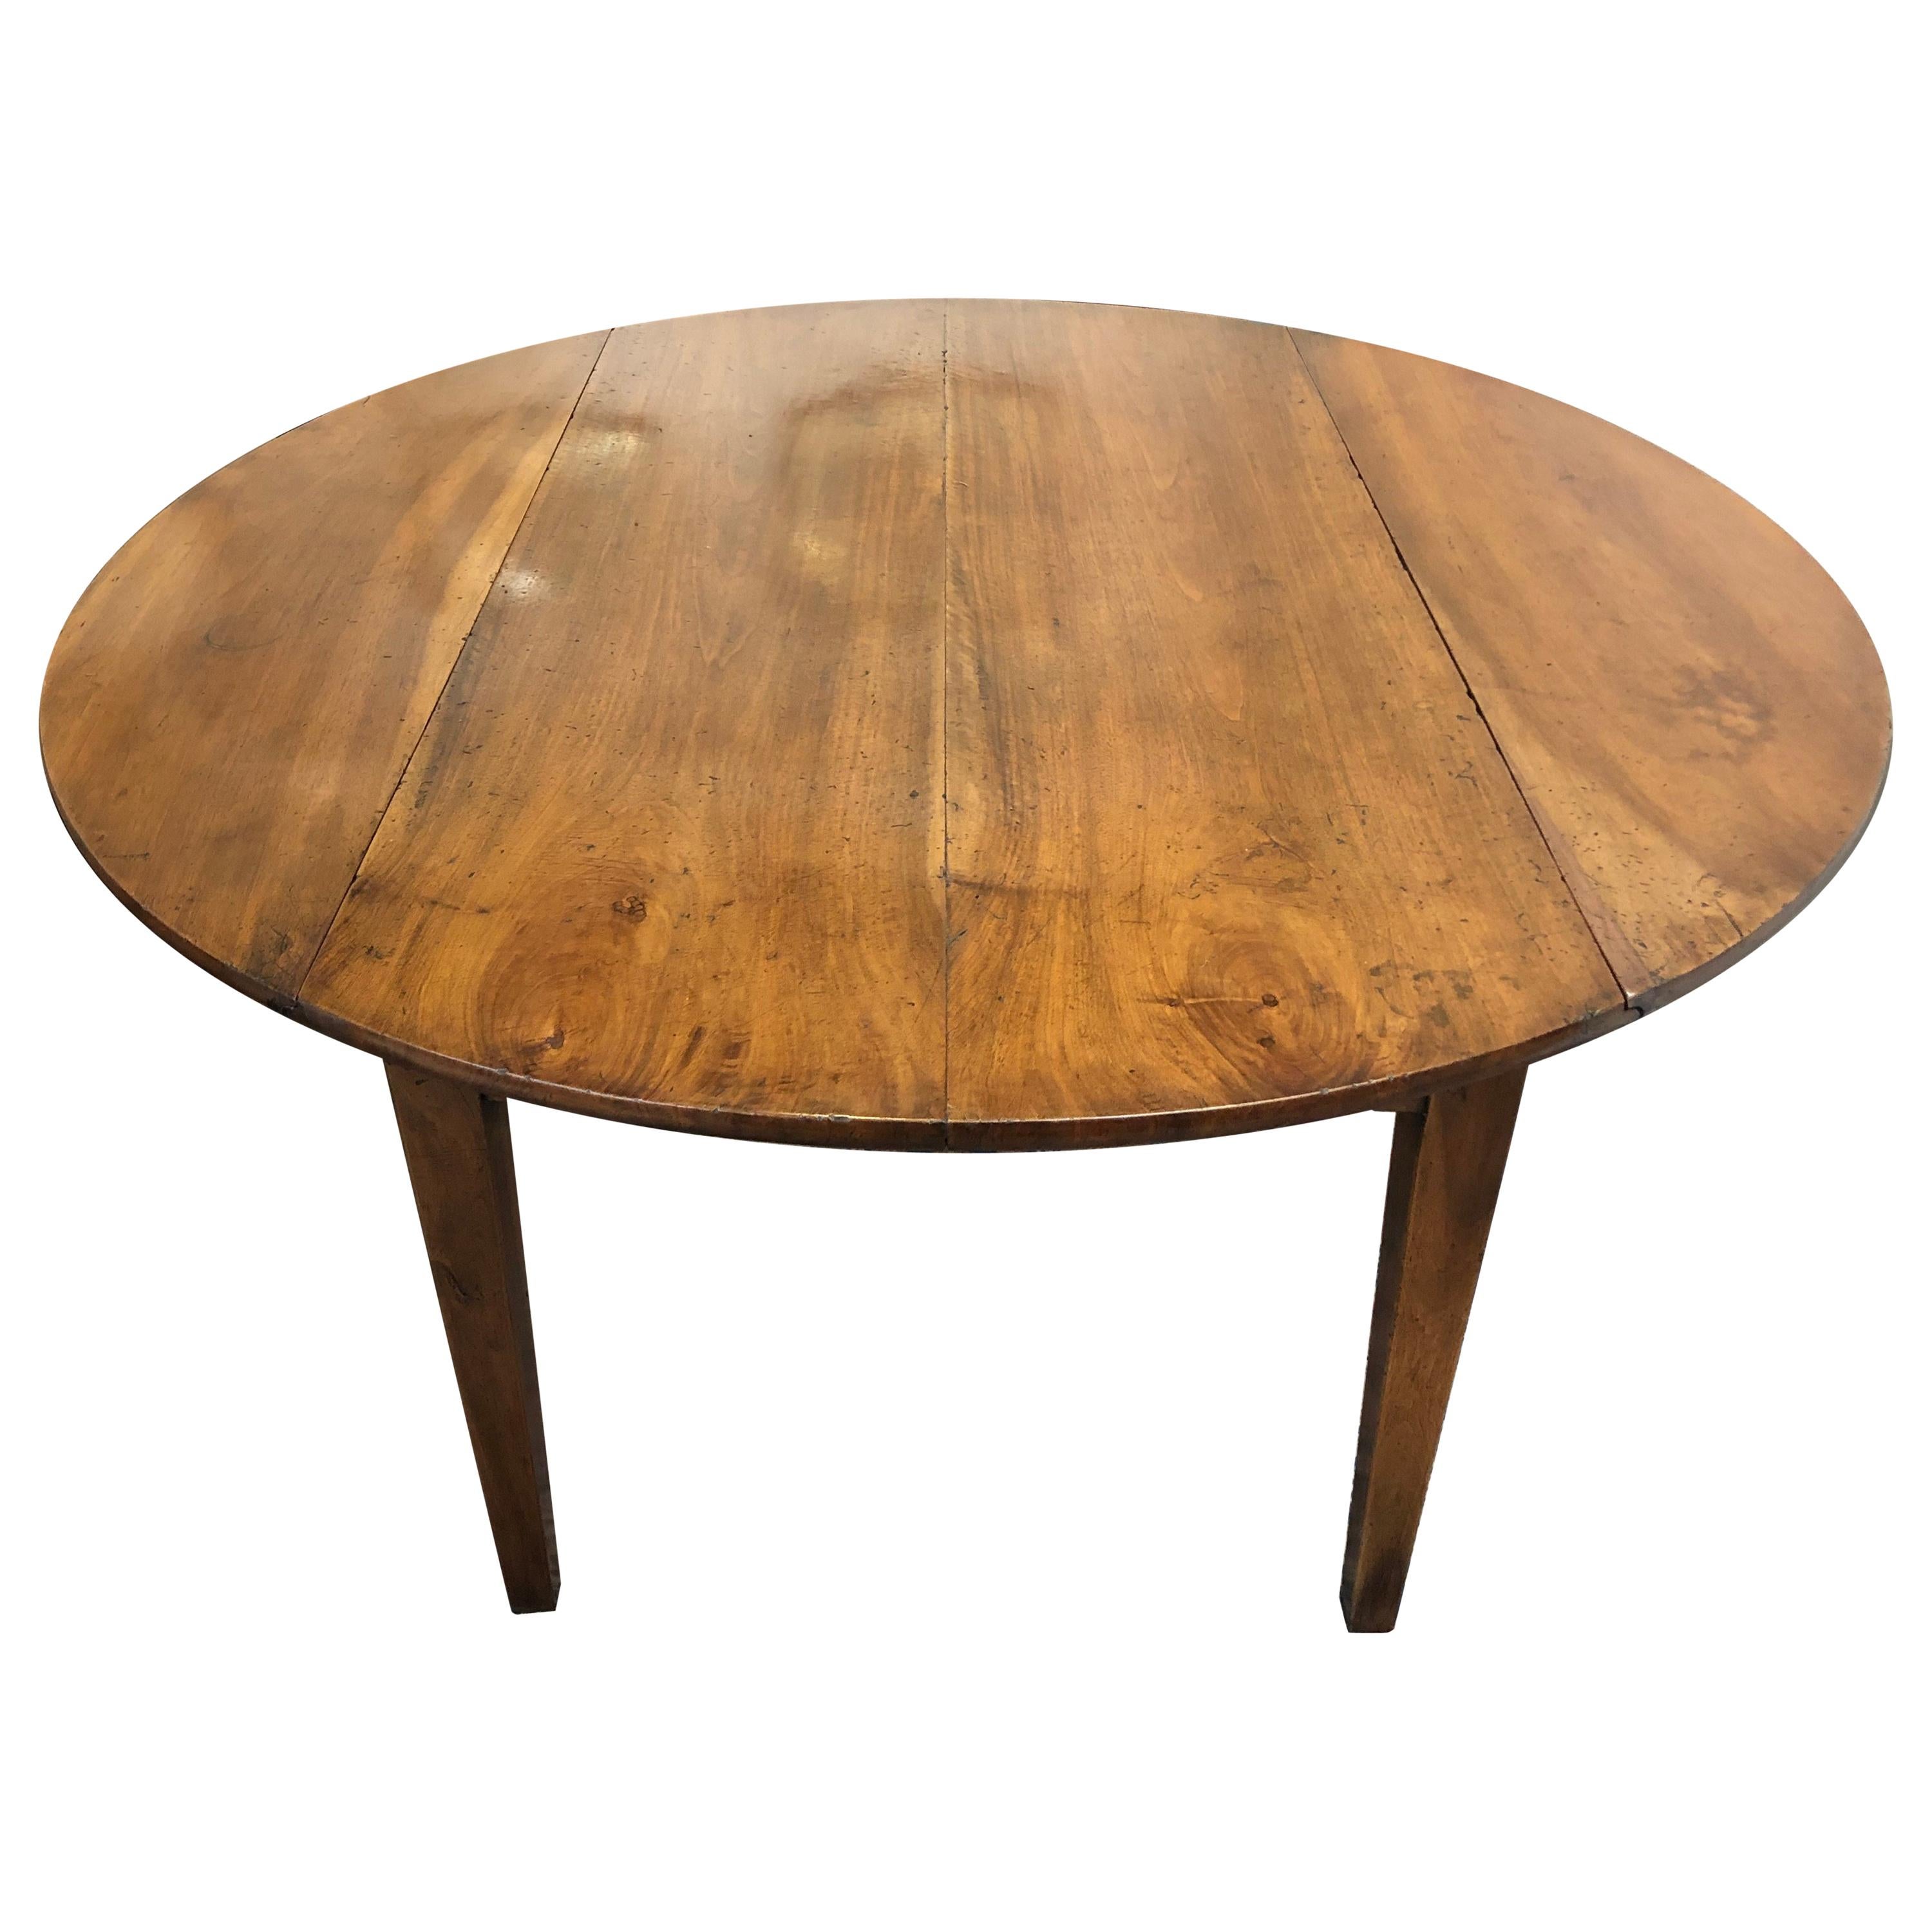 Large 19th Century French Solid Walnut Circular Dining Table